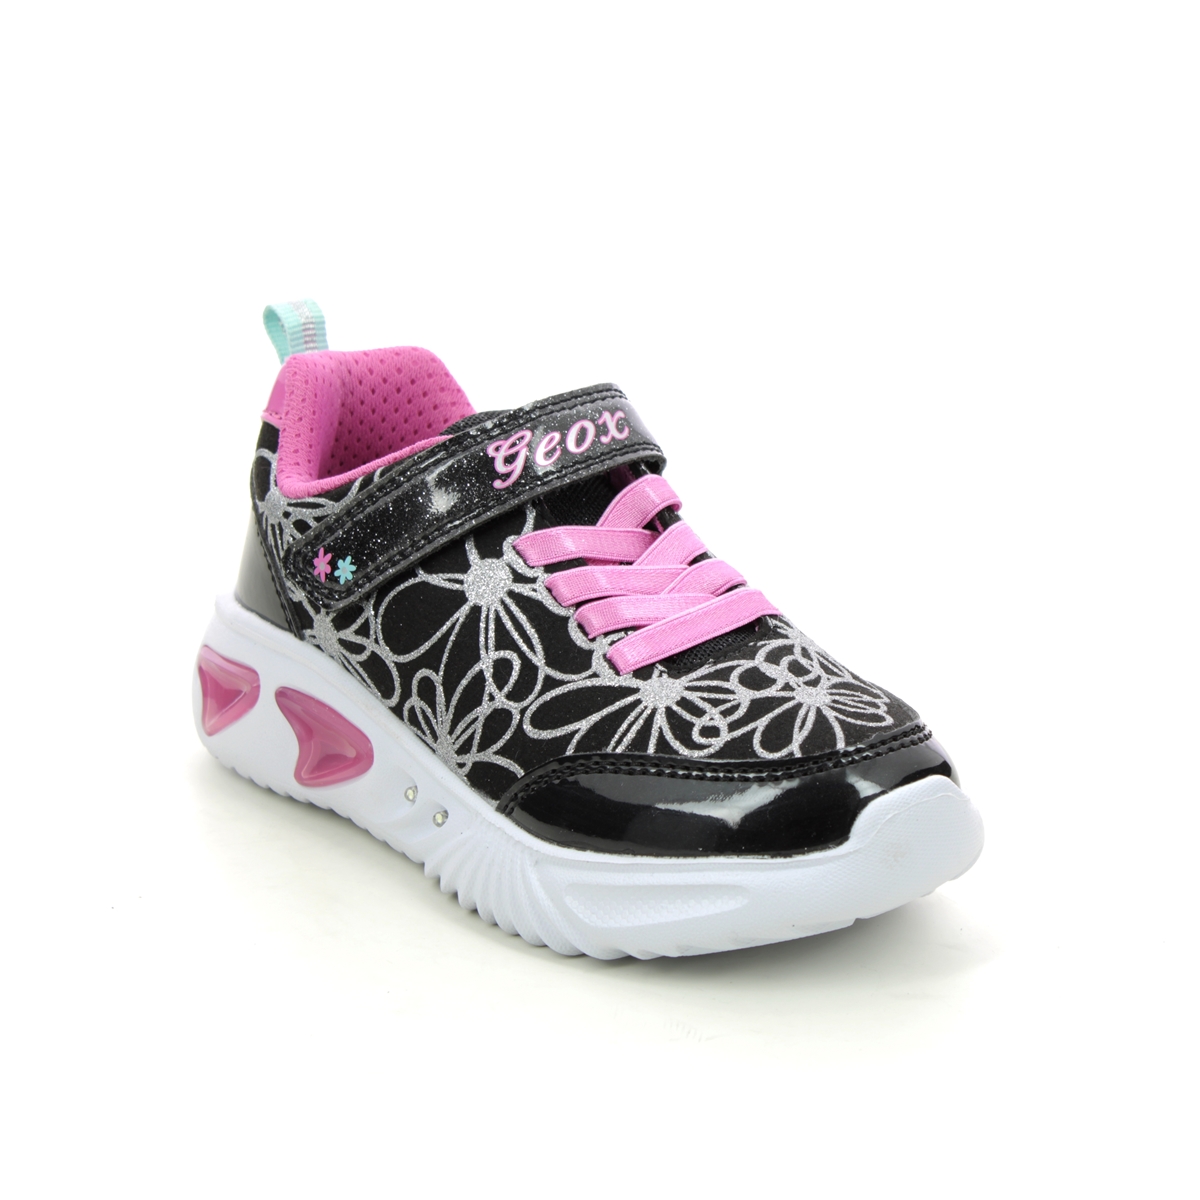 Geox - Assister Lights (Black Pink) J26E9A-C0922 In Size 29 In Plain Black Pink For kids